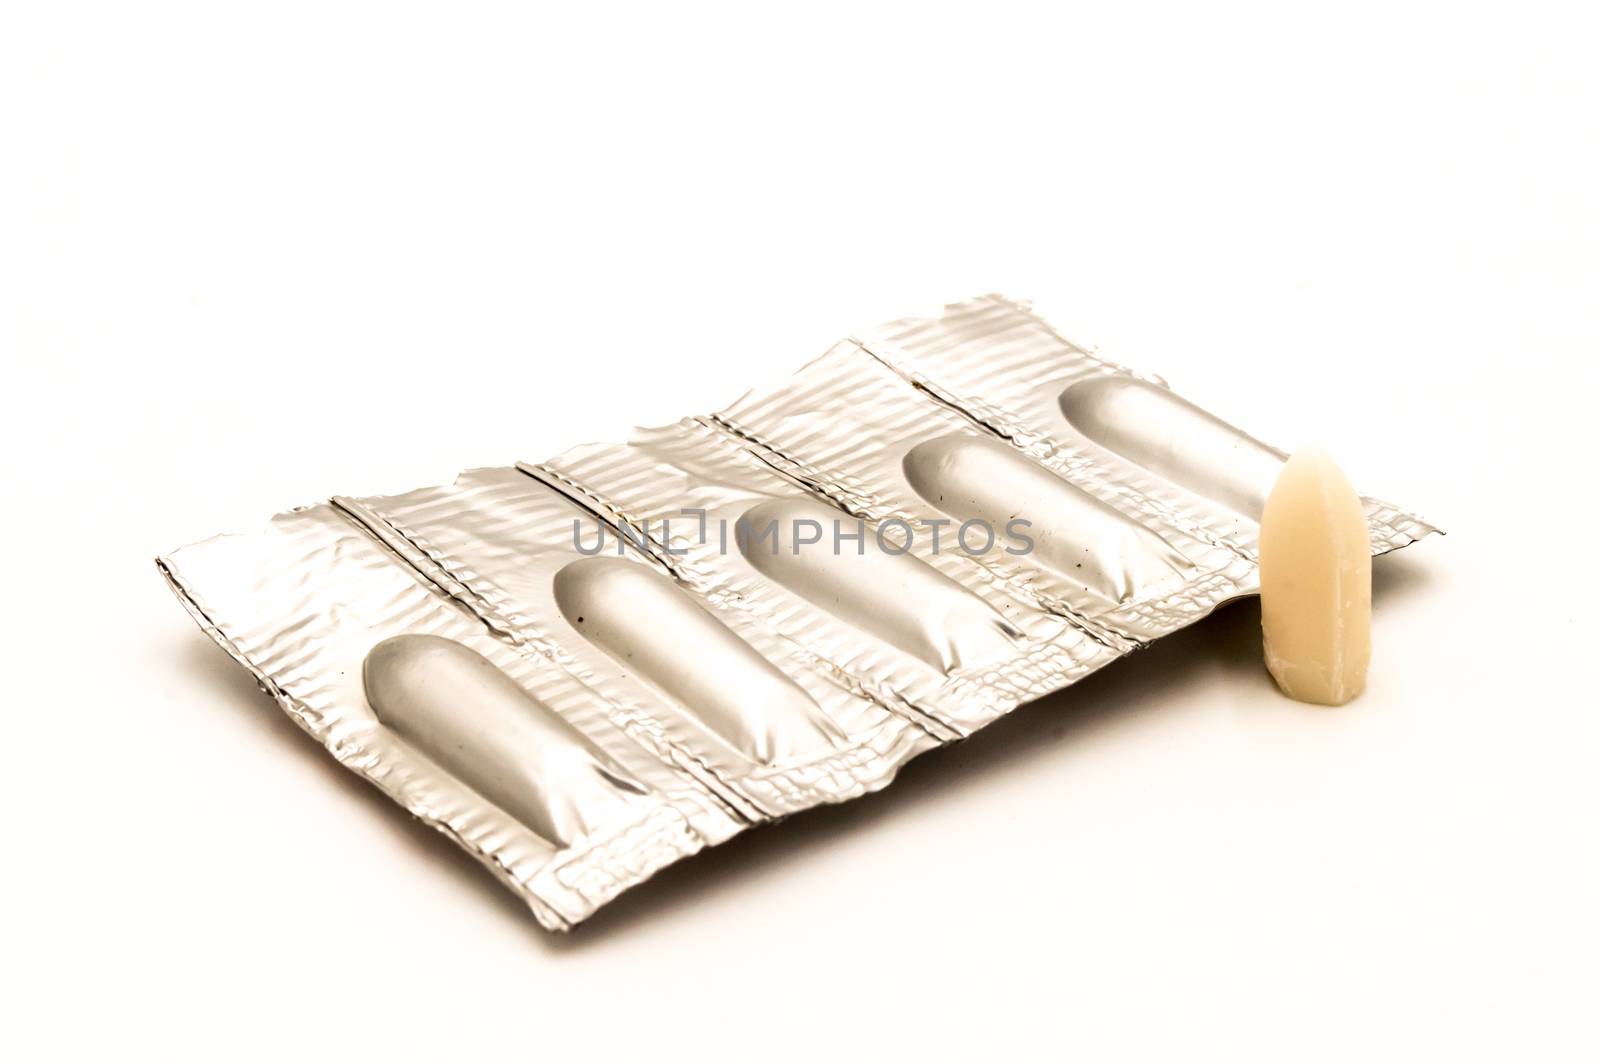 Storing suppositories on a white background